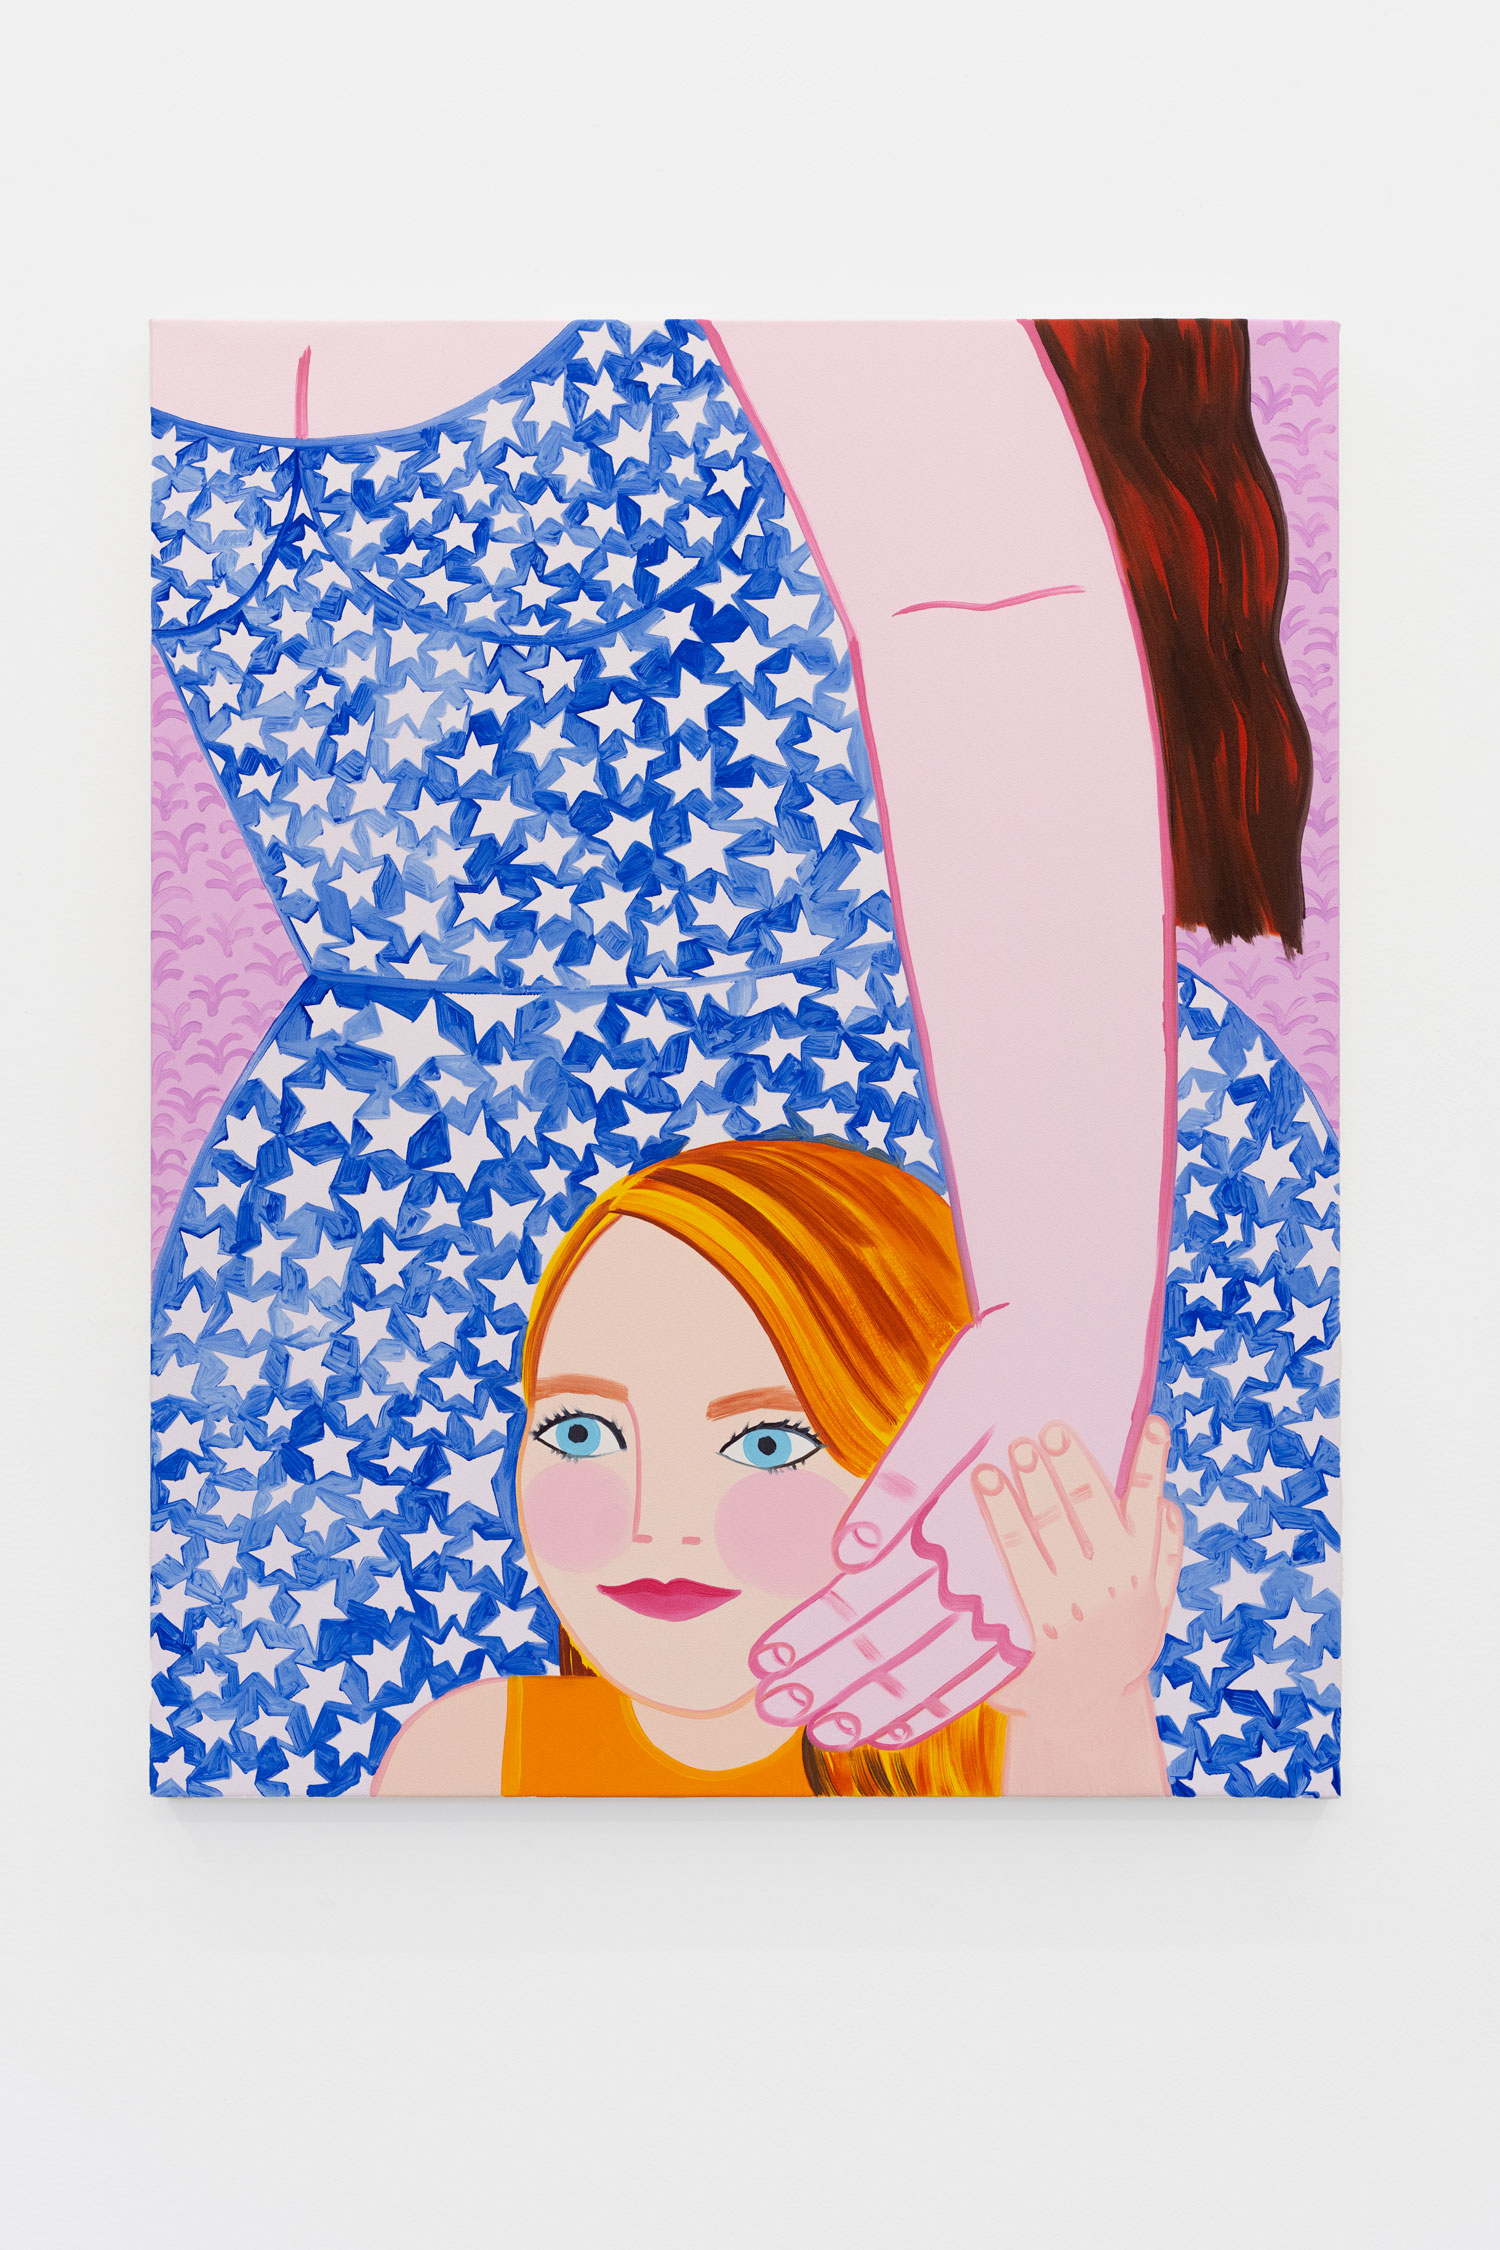 Overall image of Madeline Donahue's "Hip Height." "Hip Height" depicts a daughter standing in front of her mother's torso, holding hands with one another. The daughter measures to the height of her mother's hip.